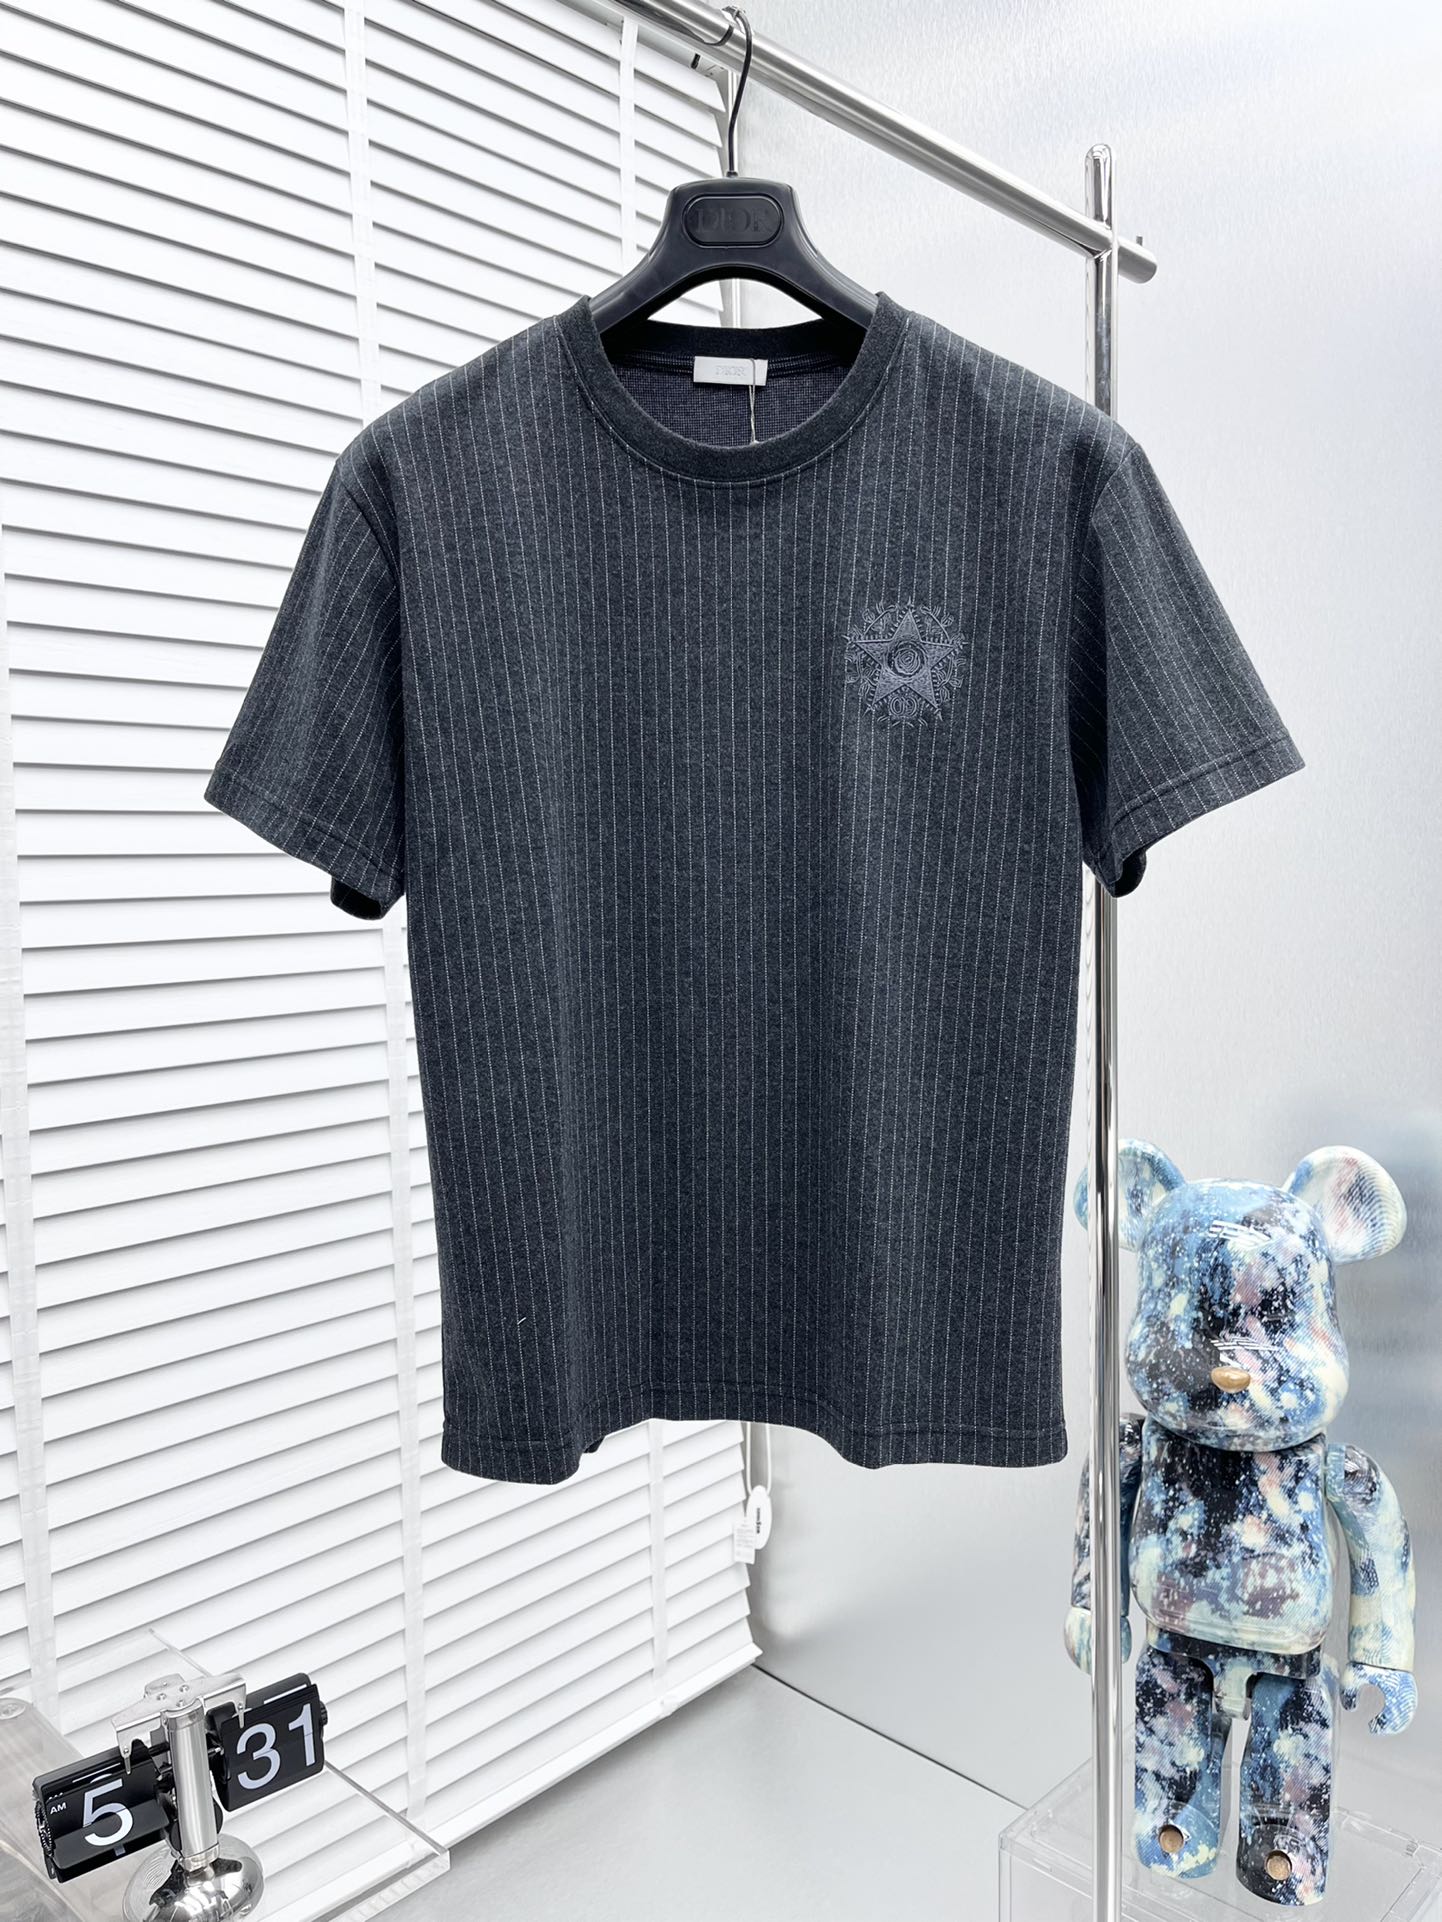 Dior Clothing T-Shirt Embroidery Unisex Short Sleeve